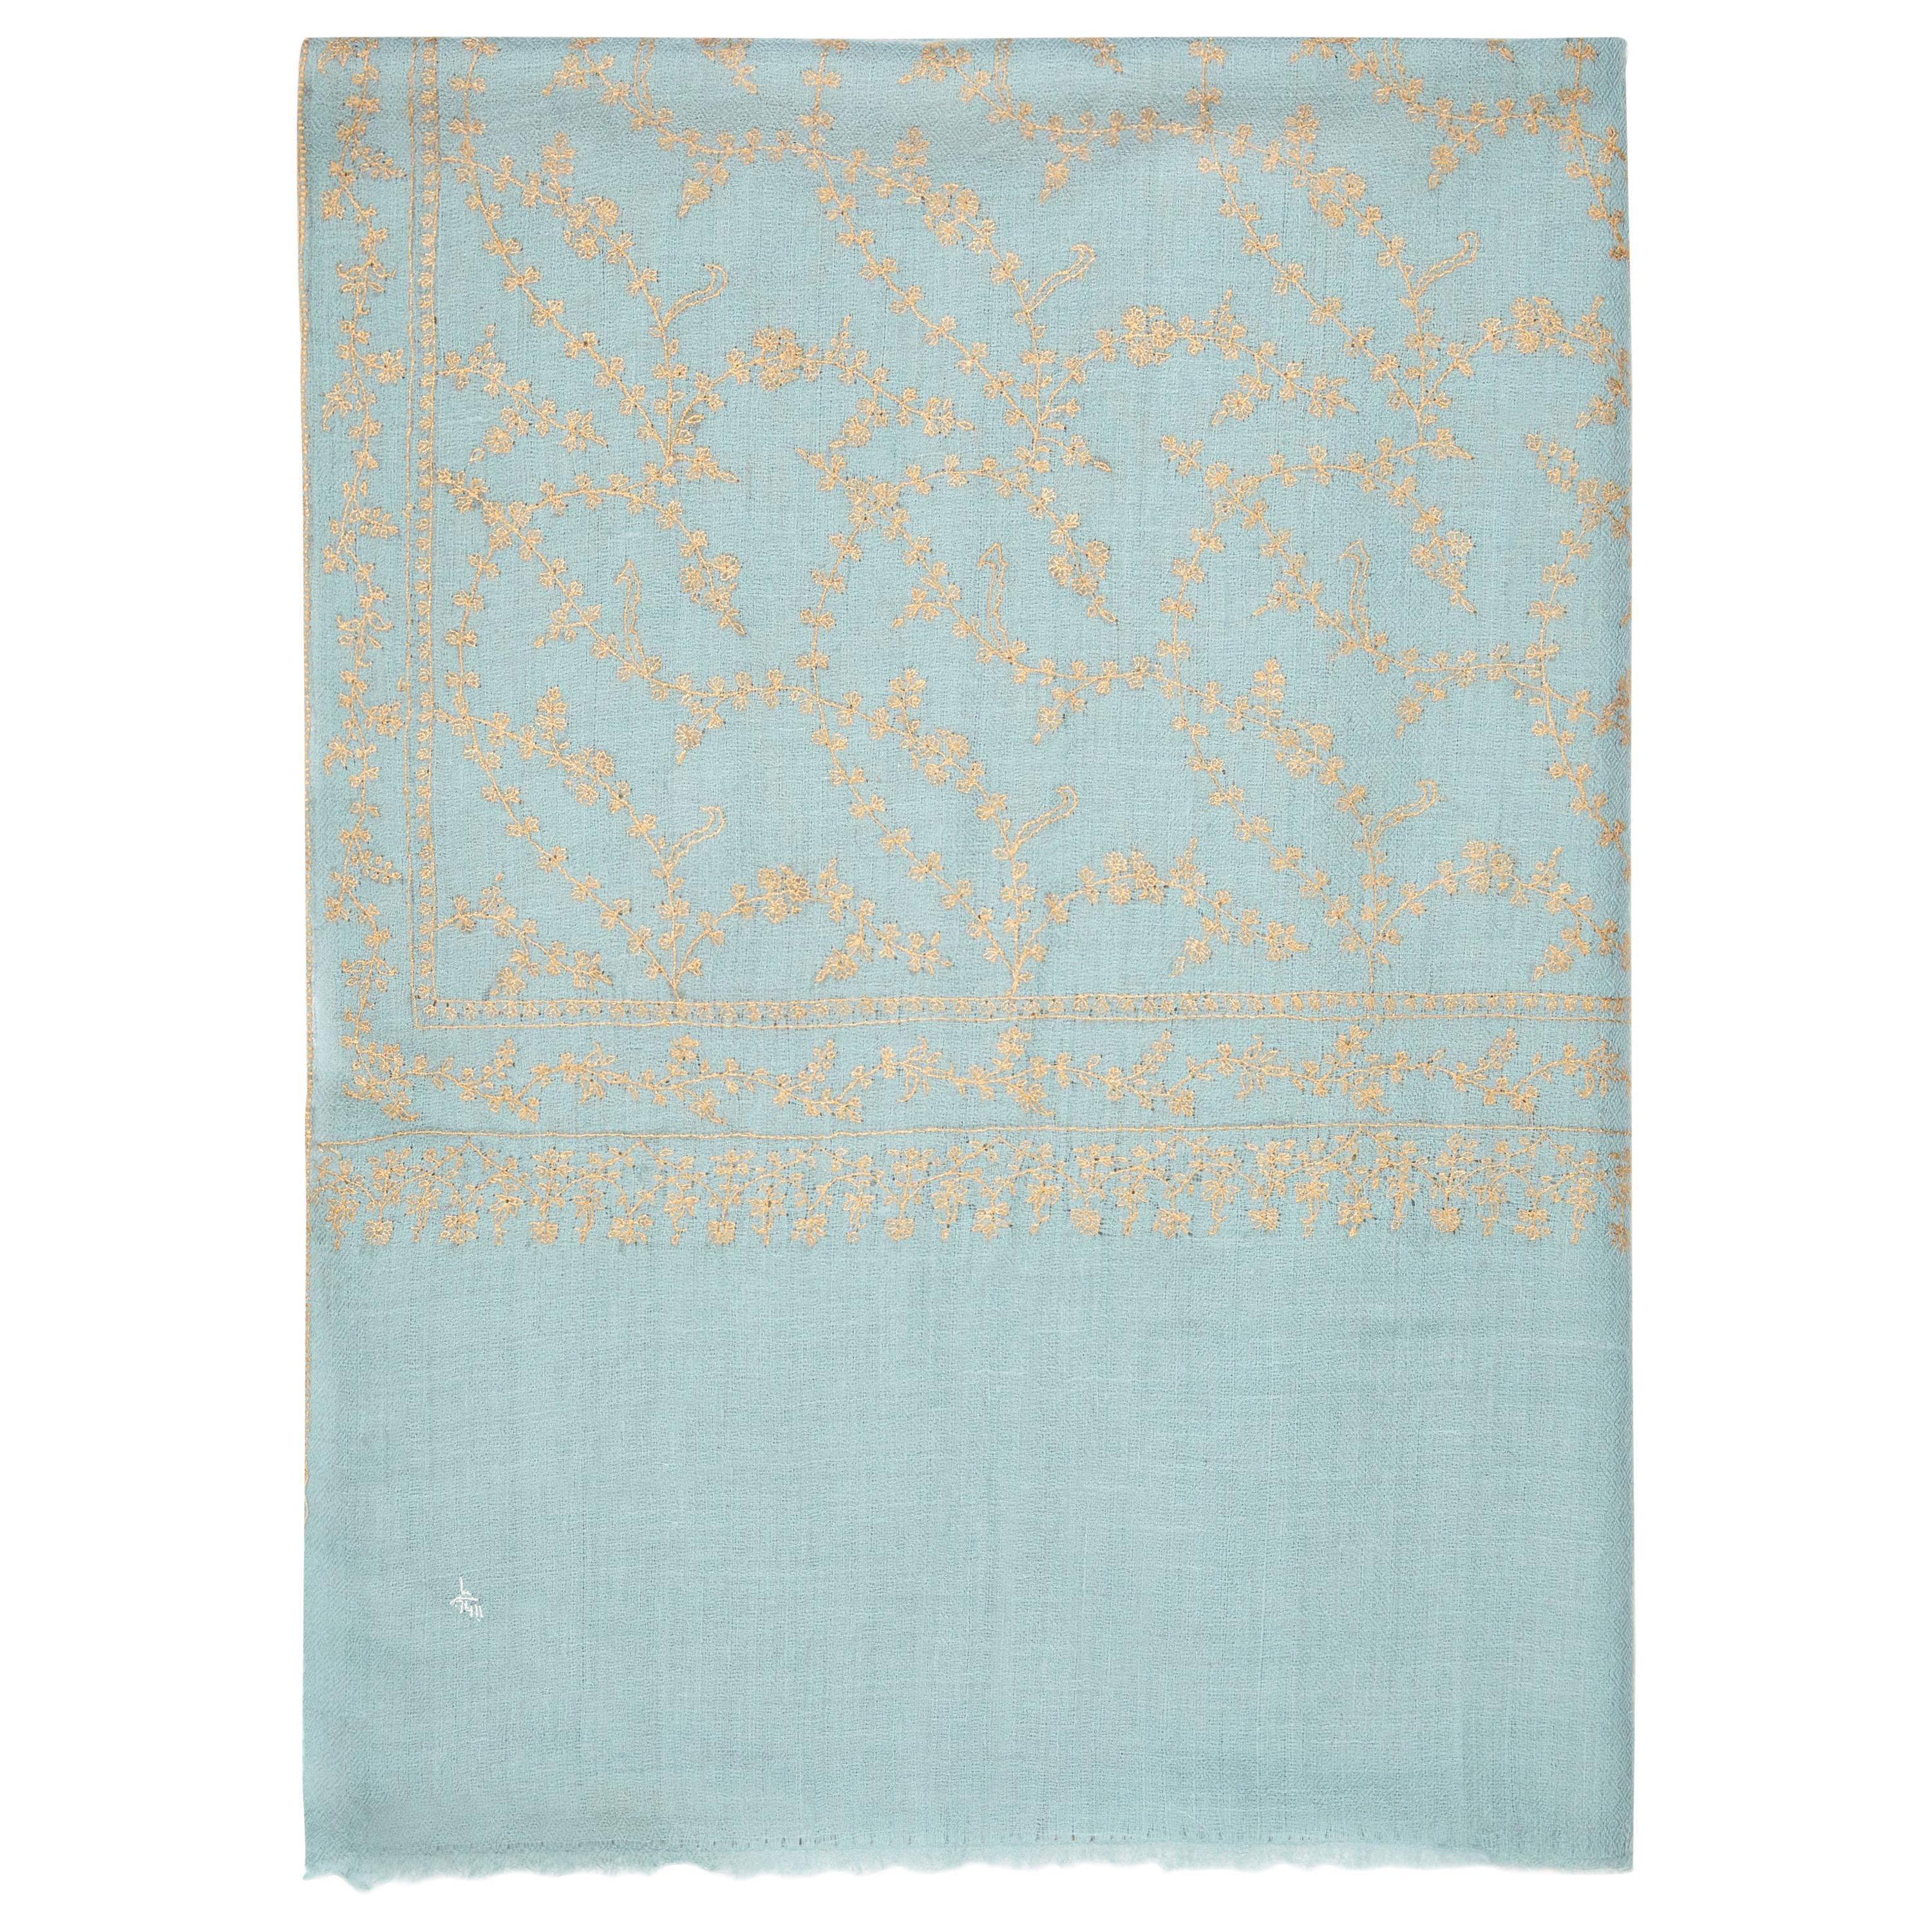 Hand Embroidered 100% Cashmere Shawl in Pale Blue & Gold Made in Kashmir - Gift